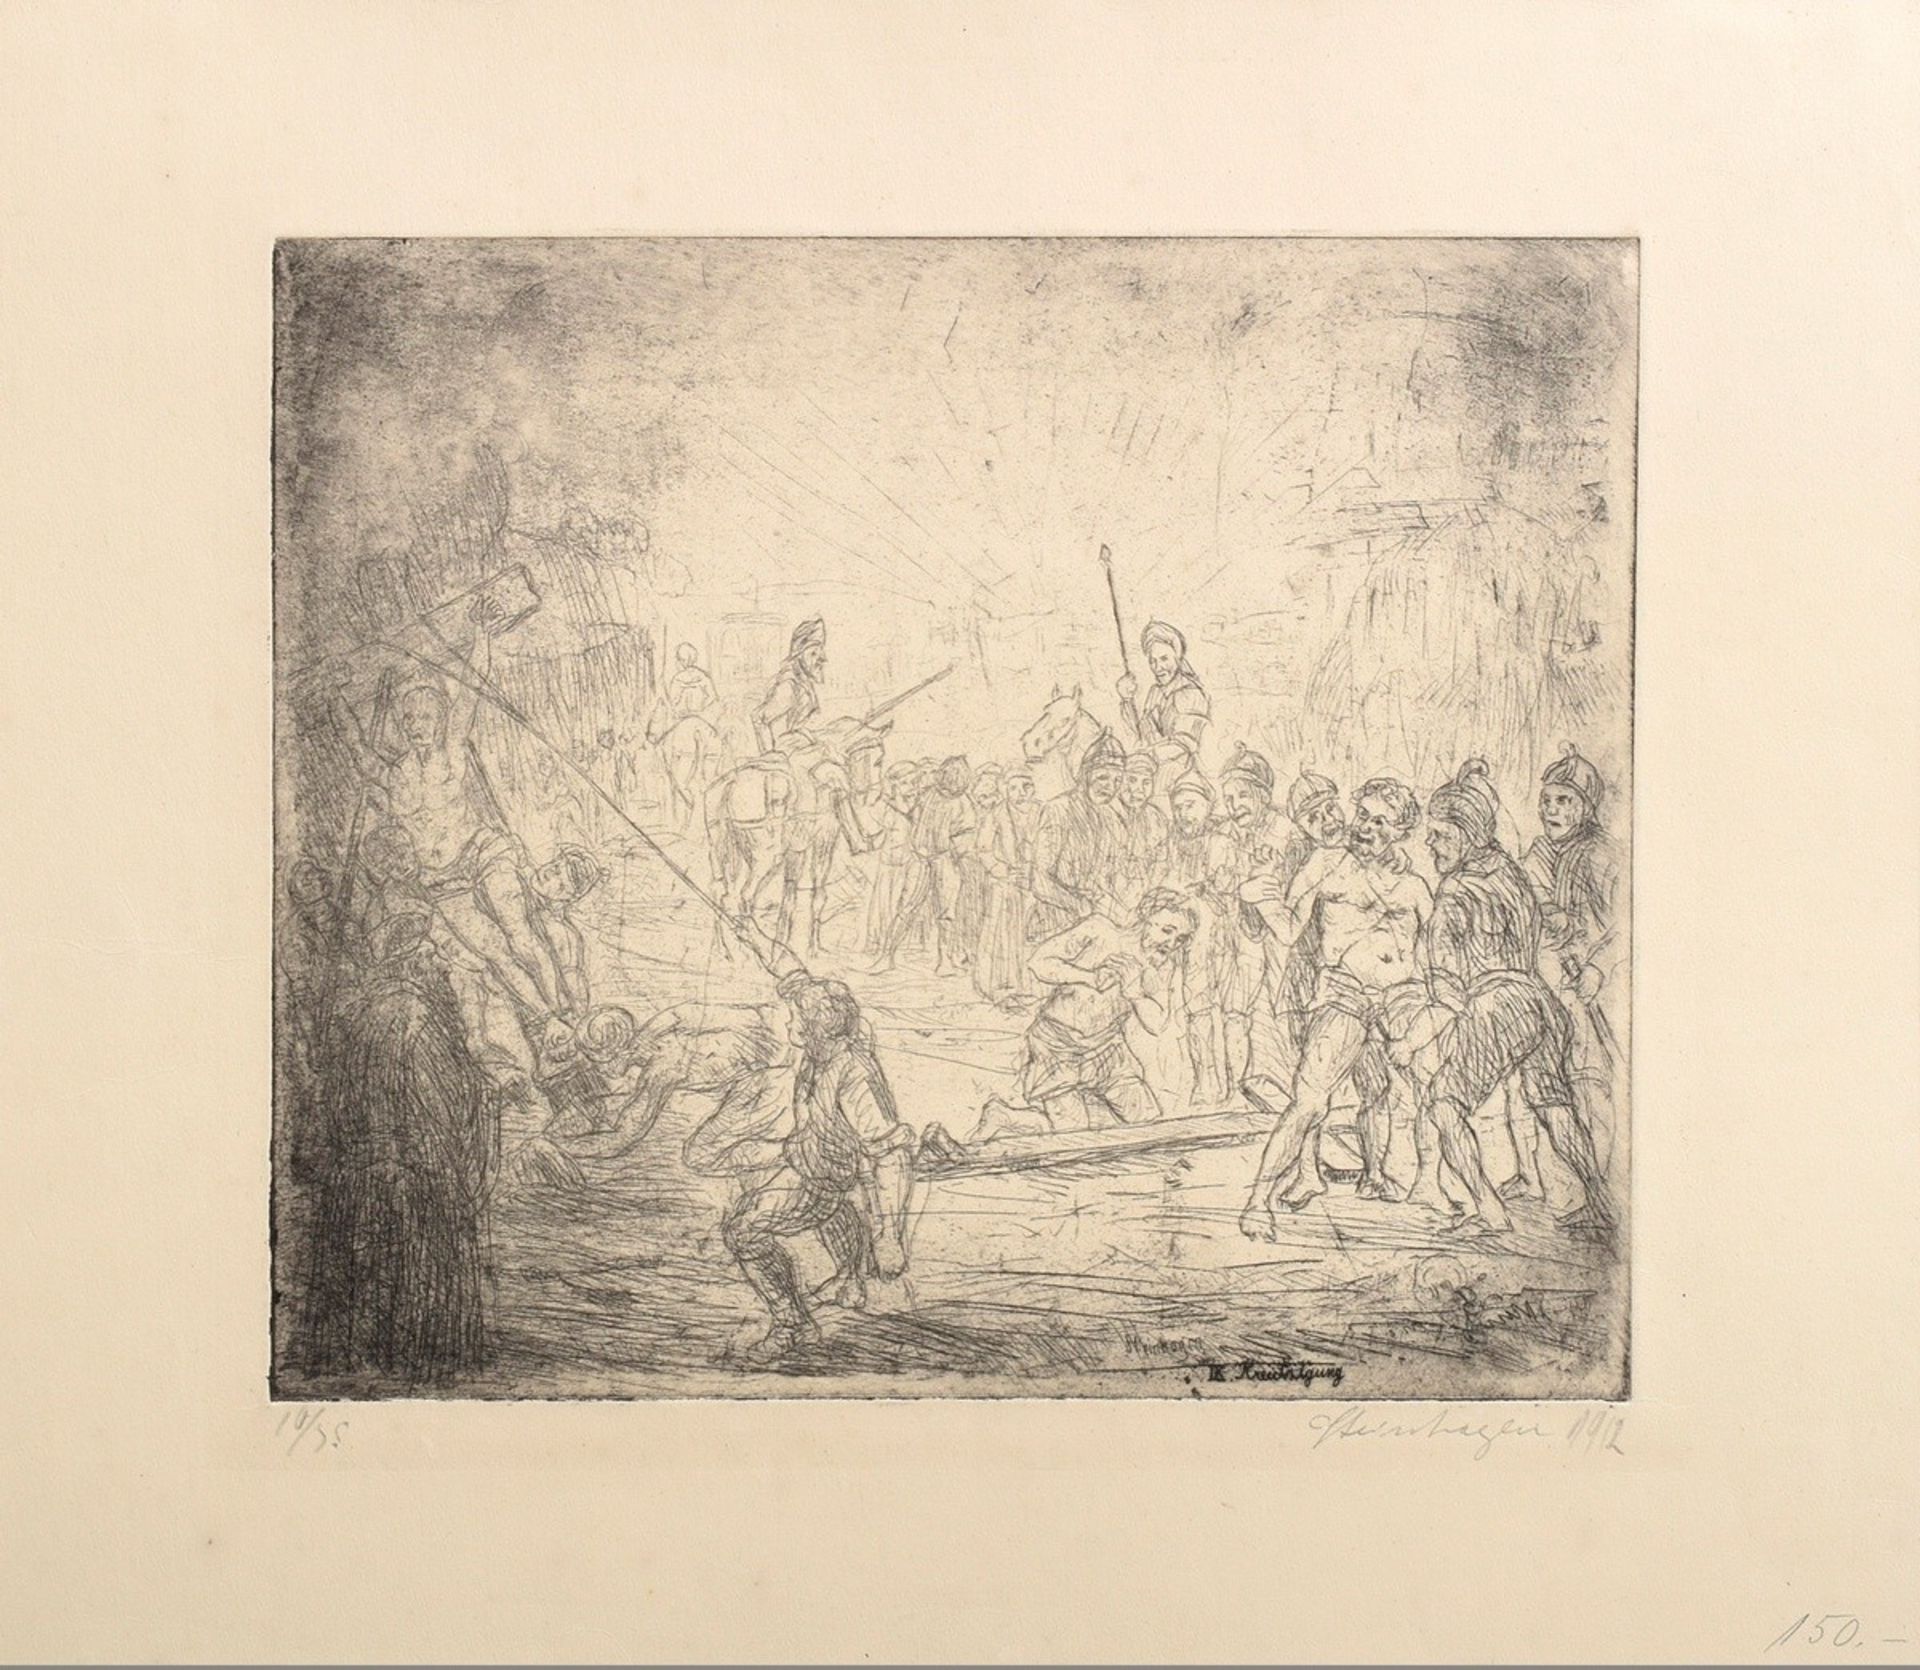 3 Steinhagen, Heinrich (1880-1948) "Christian Scenes", etchings, signed on the plate, 1x titled, si - Image 5 of 7